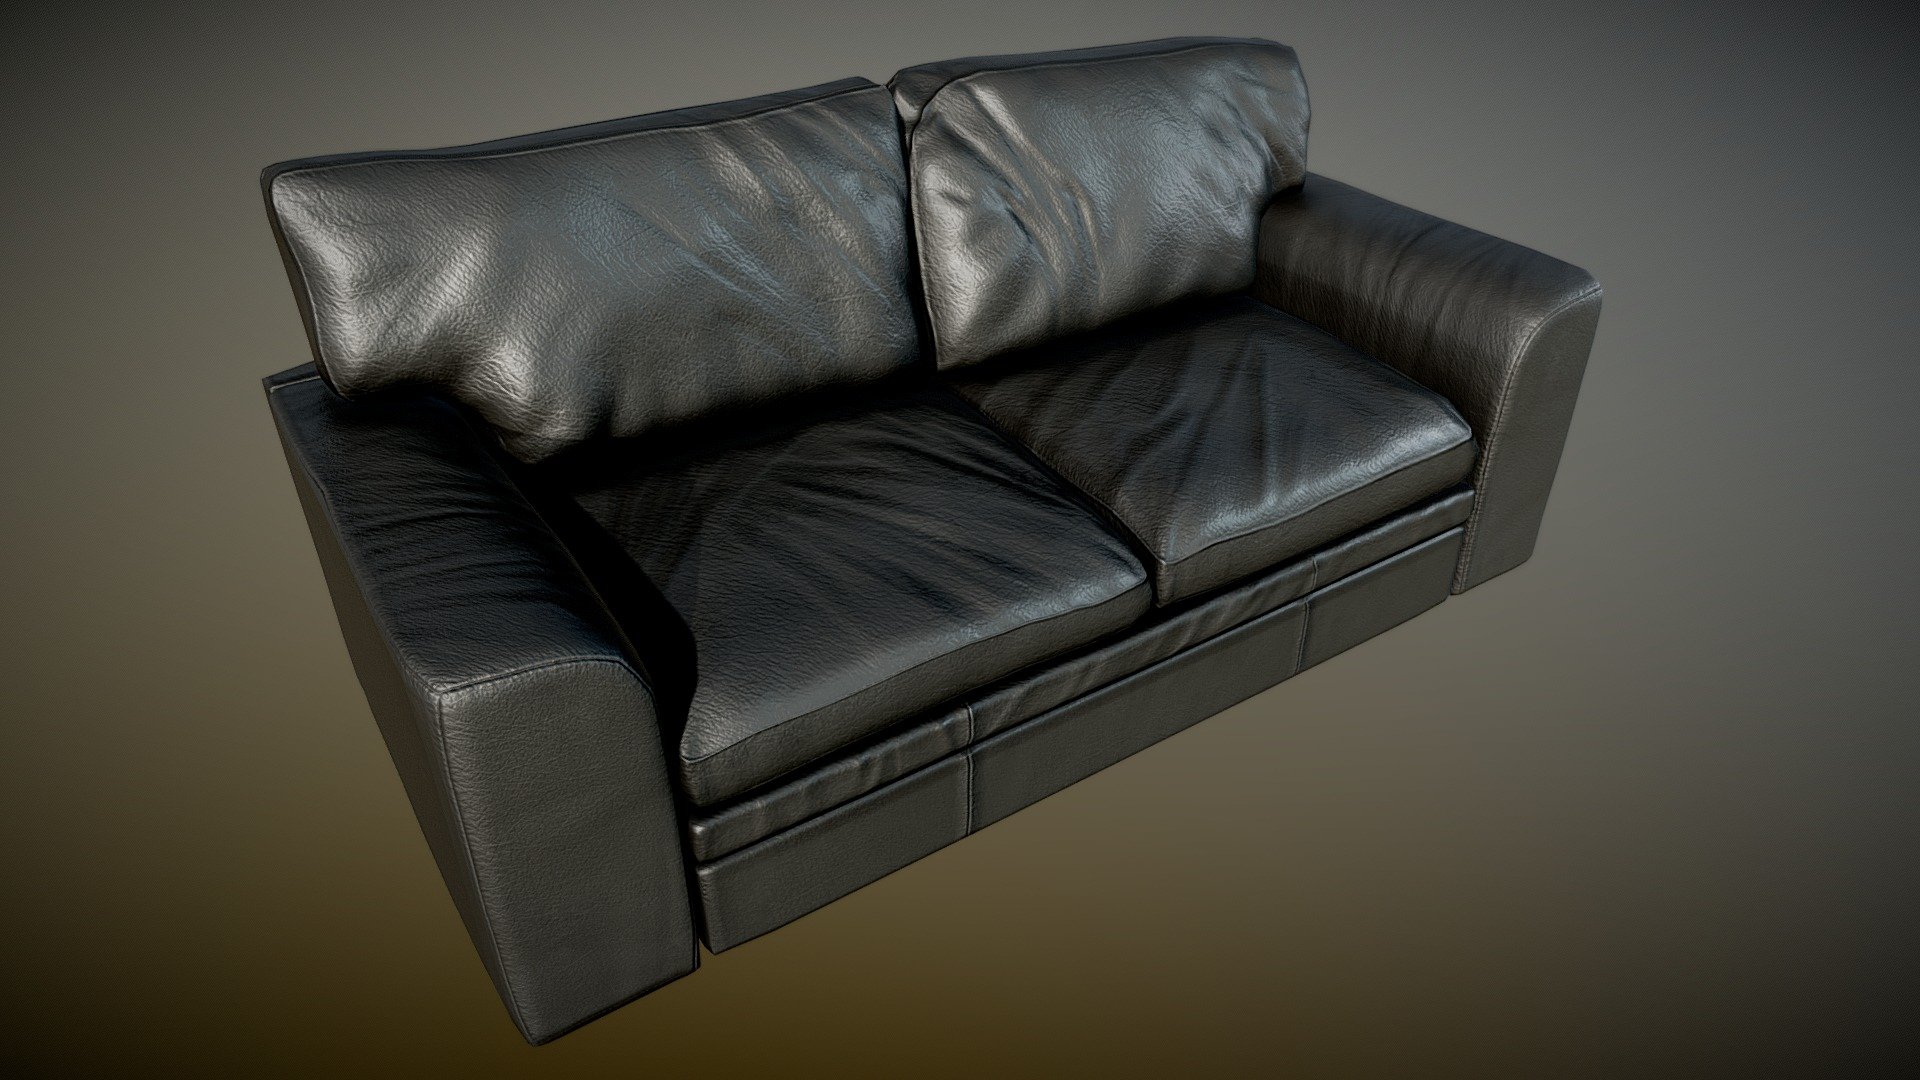 Old Clean Leather Couch Black - PBR

Very Detailed Low Poly Leather Couch / Sofa with High-Quality PBR Textures.

Fits perfect for any PBR game as Decoration, Furniture, especially in interior / home etc.

Created with 3DSMAX, Zbrush and Substance Painter.

Standard Textures
Base Color, Metallic, Roughness, Height, AO, Normal, Maps

Unreal 4 Textures
Base Color, Normal, OcclusionRoughnessMetallic

Unity 5/2017 Textures
Albedo, SpecularSmoothness, Normal, and AO Maps

2 x 4096x4096 TGA Textures for each style.

Please Note, this PBR Textures Only. 

Low Poly Triangles 

5634 Tris
2096 Verts

File Formats :

.Max2018
.Max2017
.Max2016
.Max2015
.FBX
.OBJ
.3DS
.DAE - Old Clean Leather Couch Black - PBR - Buy Royalty Free 3D model by GamePoly (@triix3d) 3d model